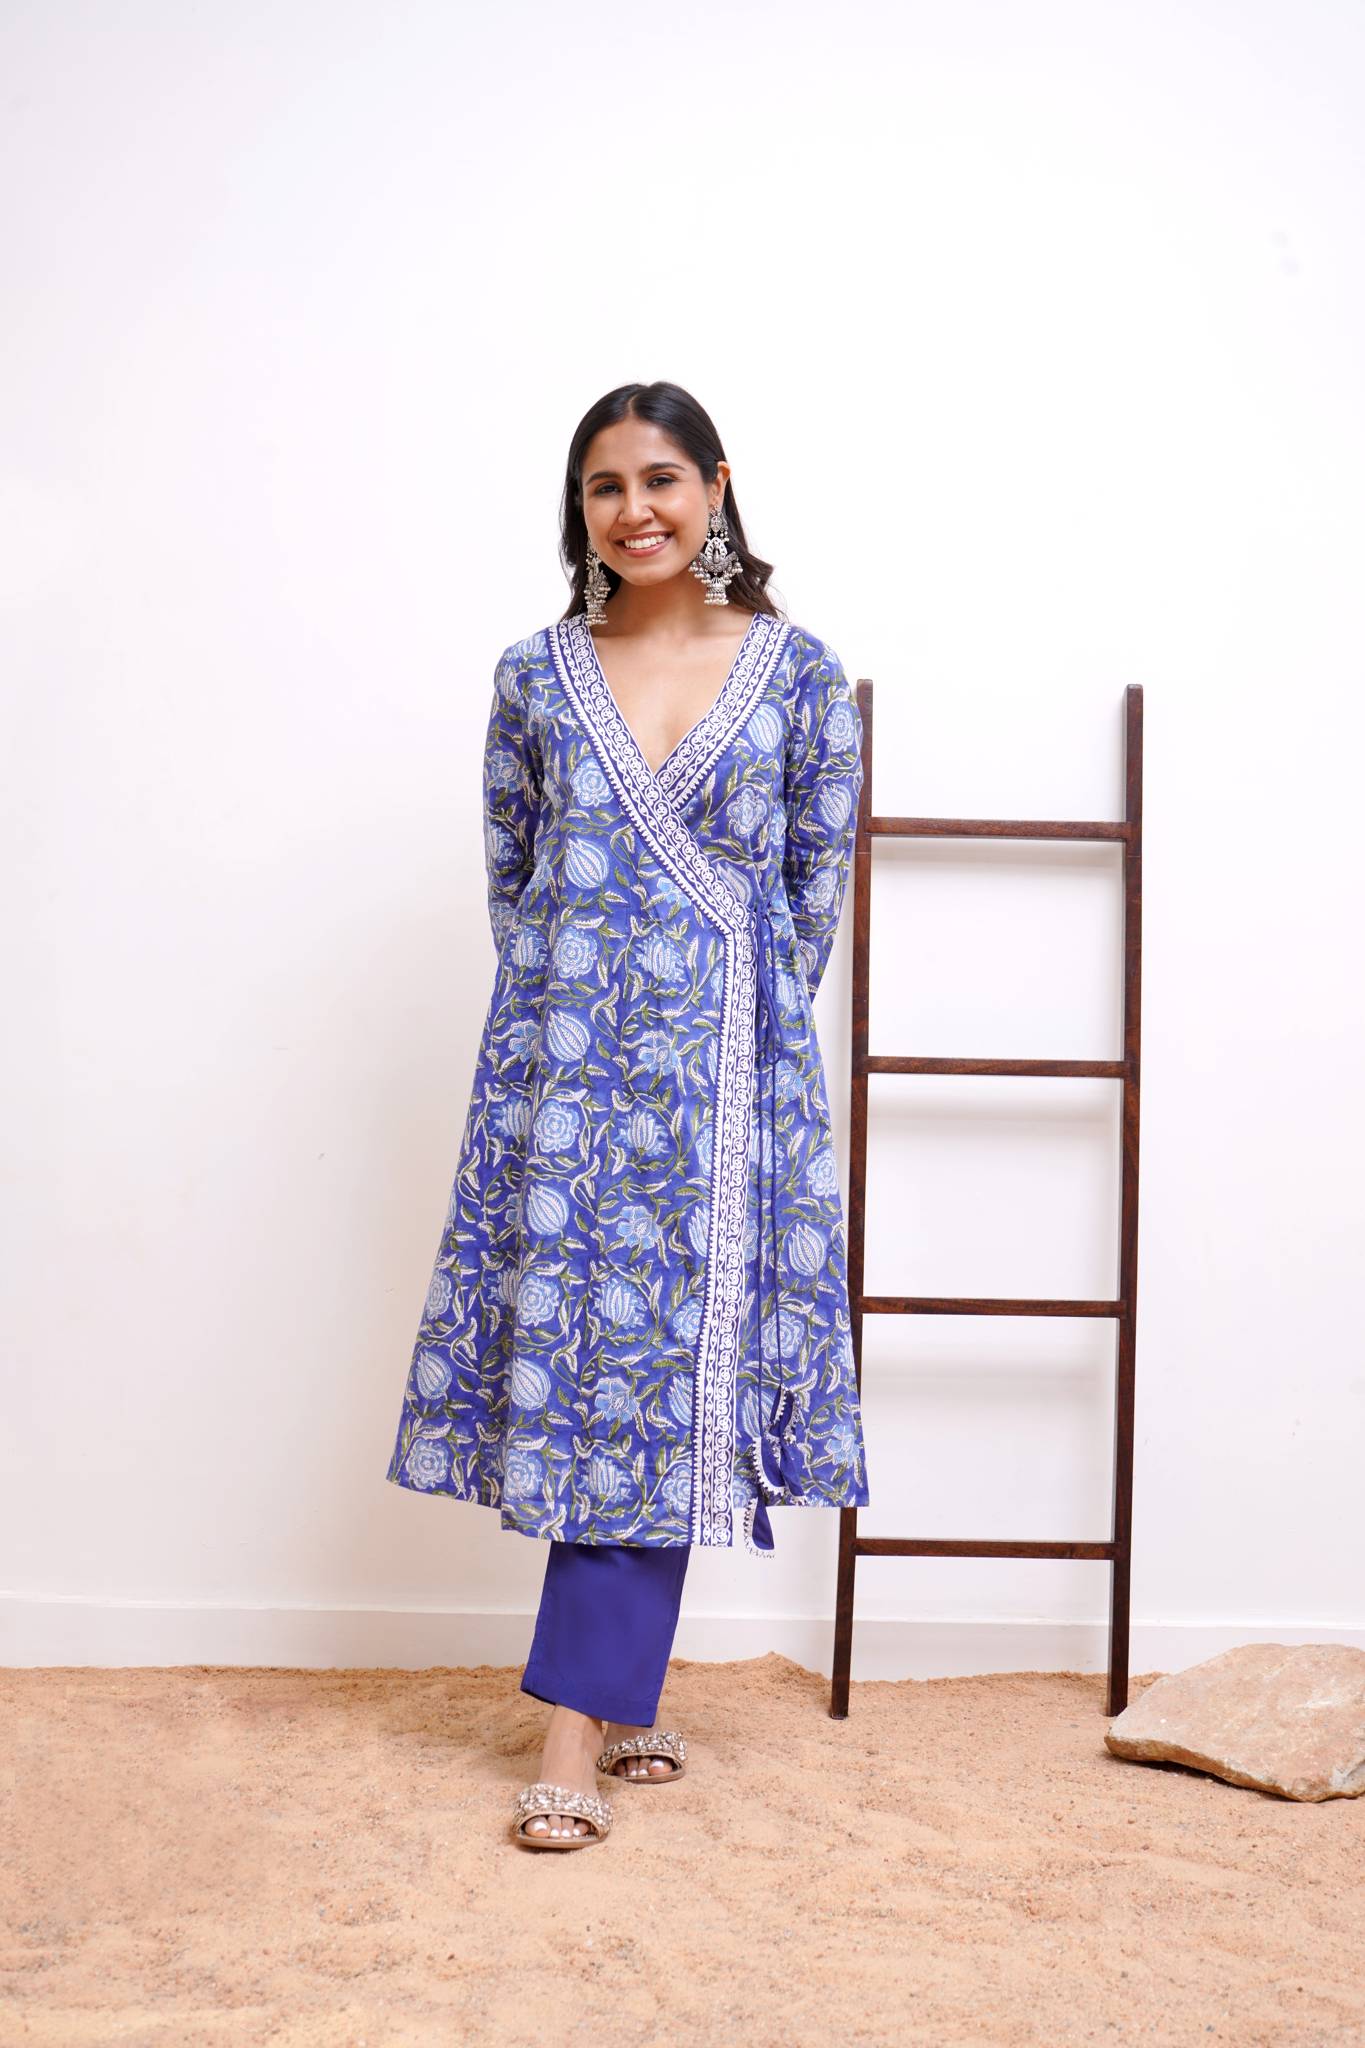 What is the difference between Kurti and Kurta? - Quora